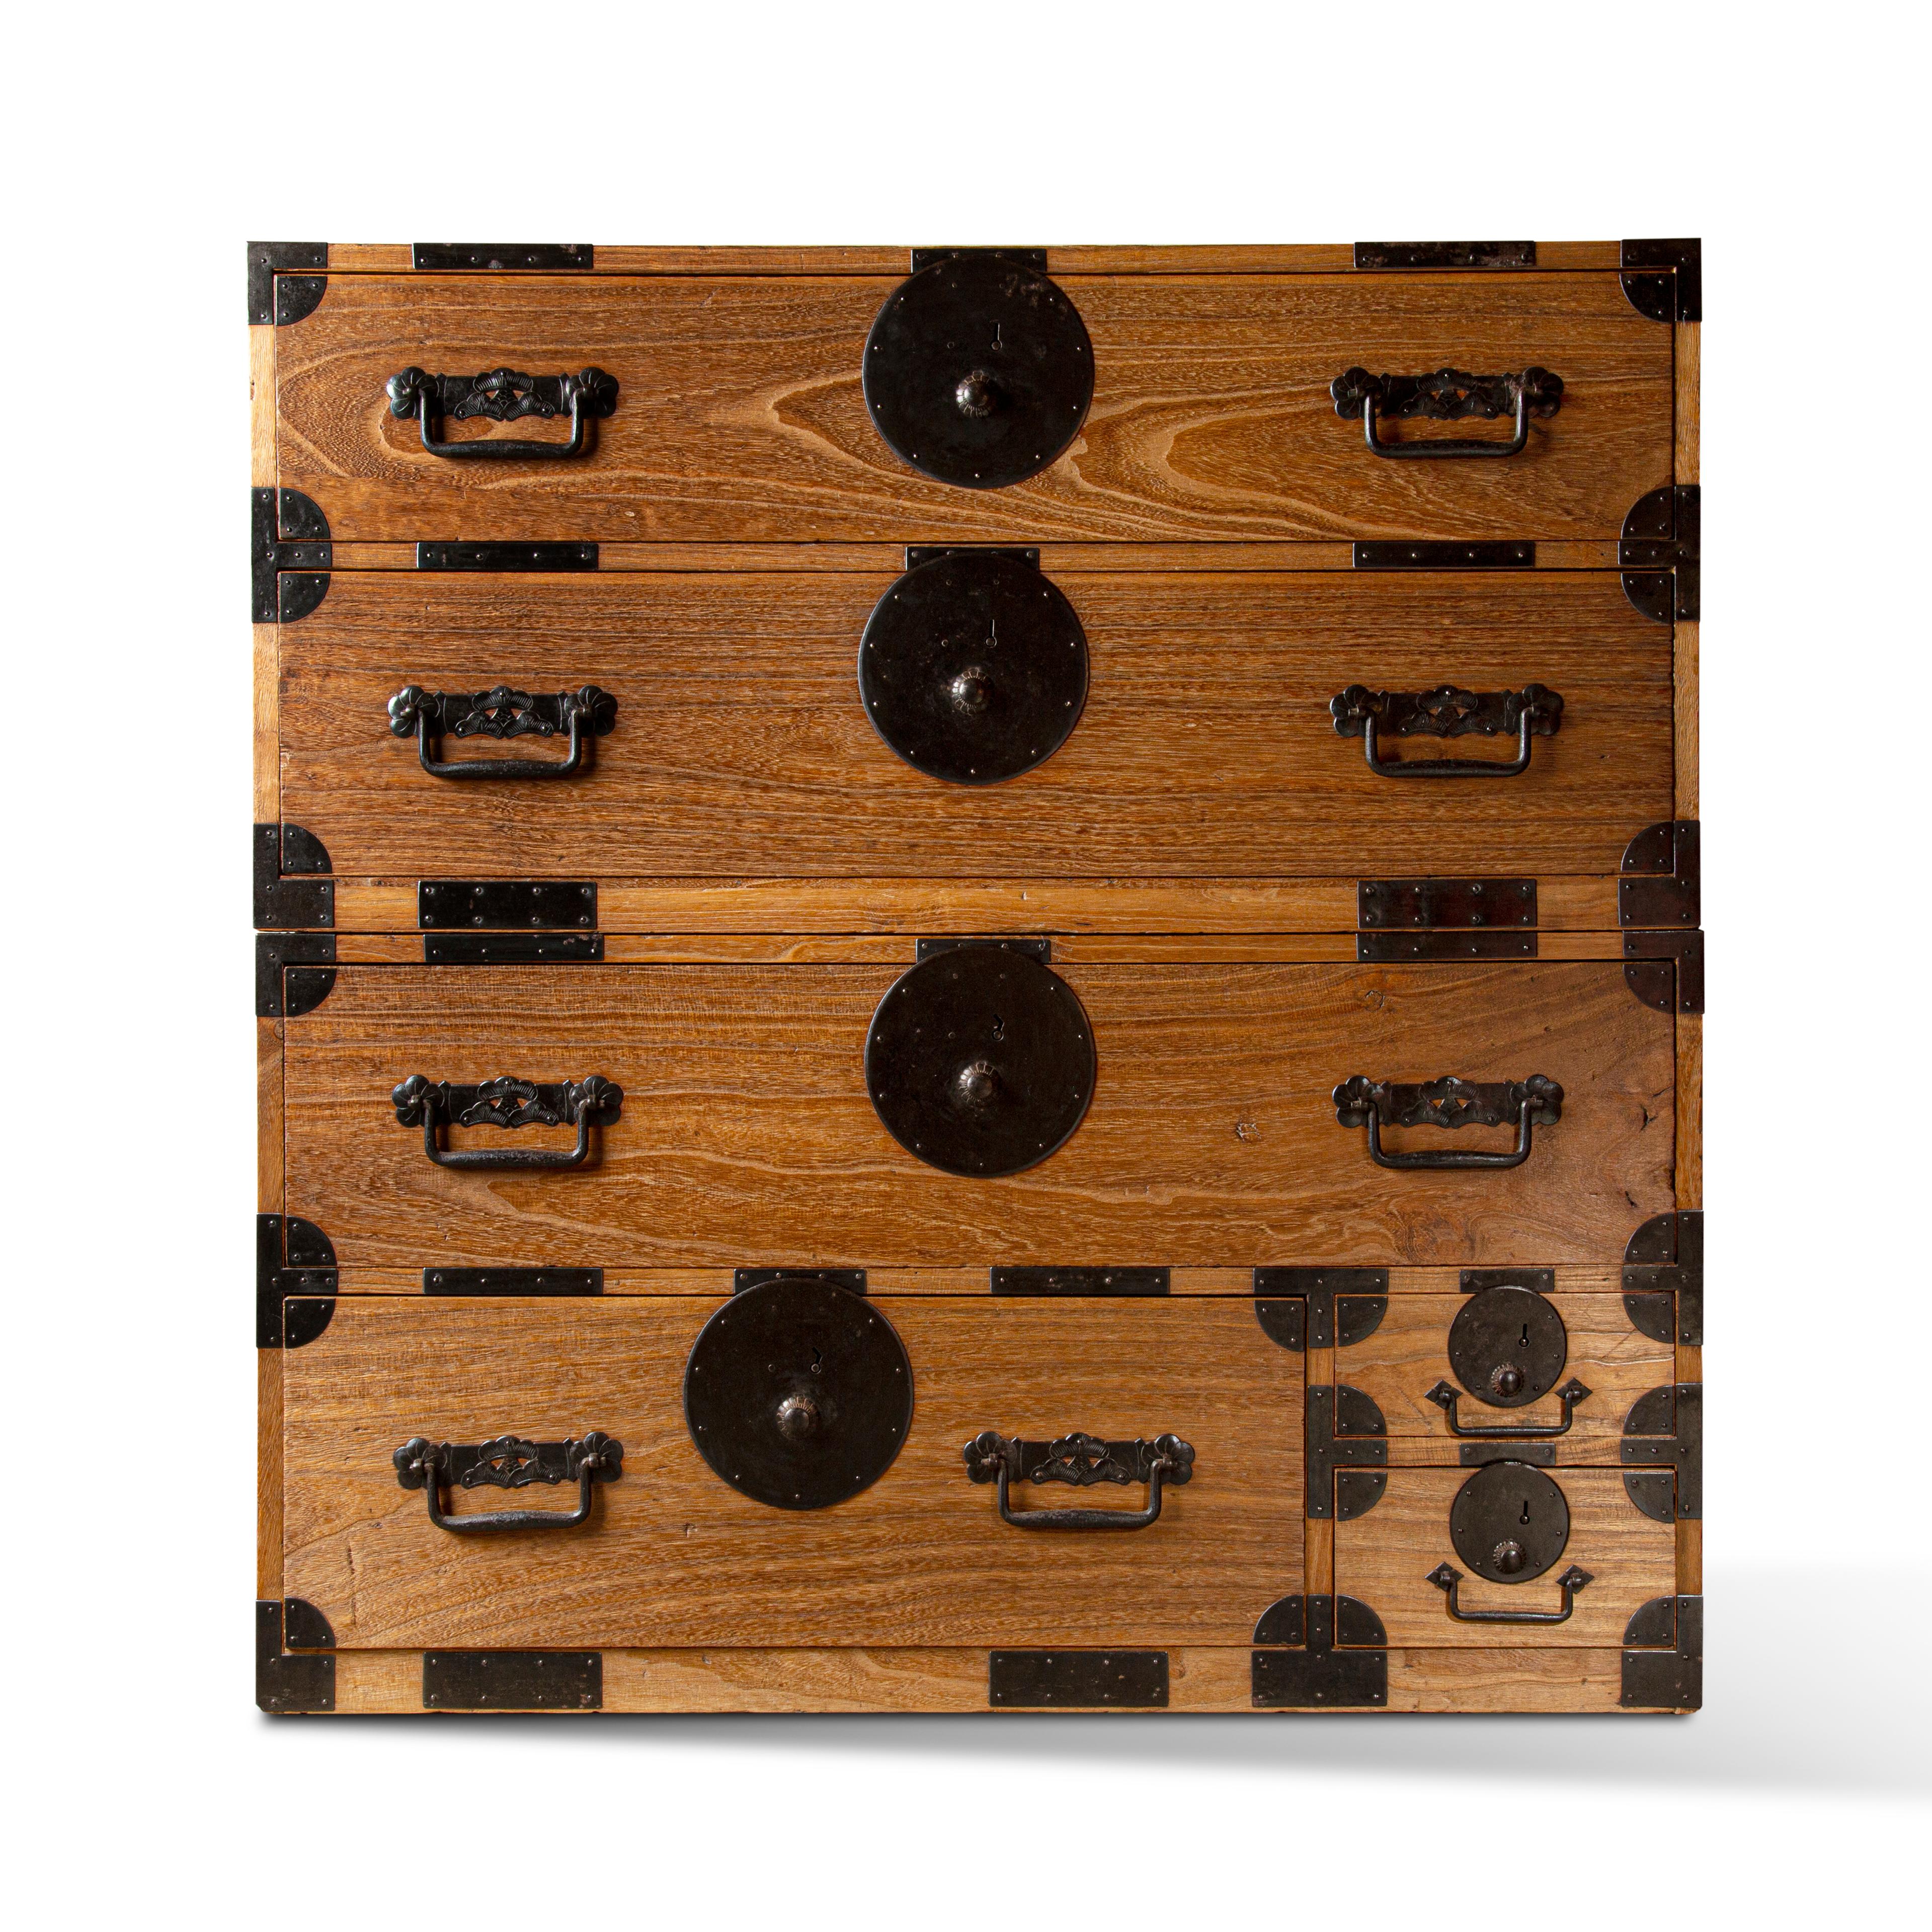 This 20th-century Japanese Tokyo Tansu chest for clothing produced at the beginning of the Taisho period it’s an example of furniture characteristic of this period in Japan and in vogue for its simple forms and versatility. Composed of cypress wood